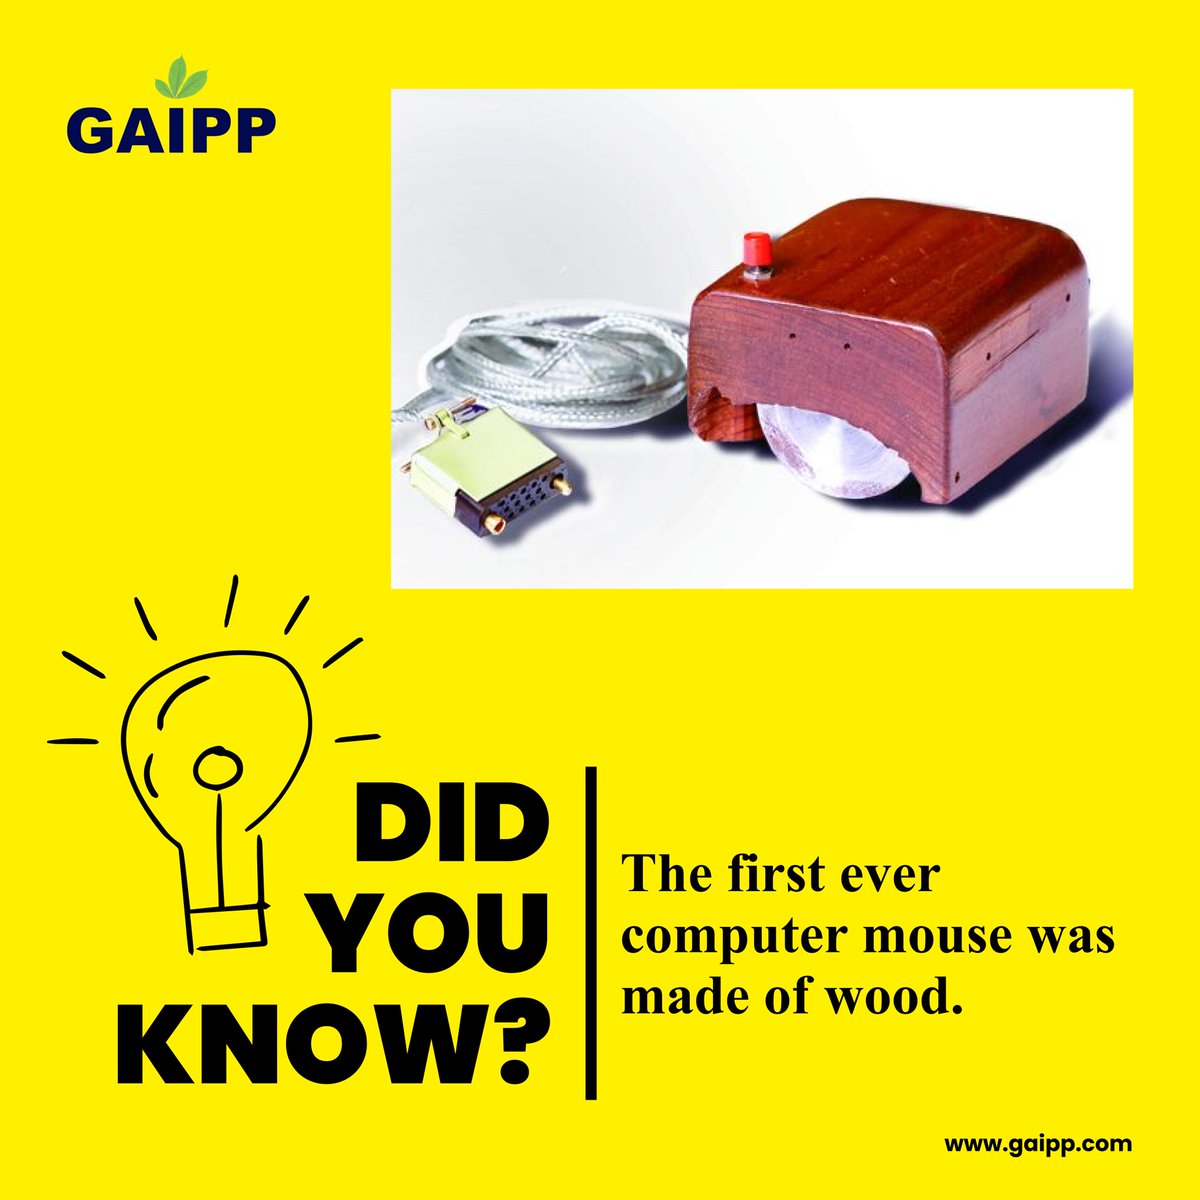 The first computer mouse was invented by Douglas Engelbart in the 1960s as part of an ARPA-funded experiment to find better ways for computer users to interact with computers. 

#computerhistory #DouglasEngelbart #Gaipp #invention #woodenmouse #userinterface #technology #ARPA